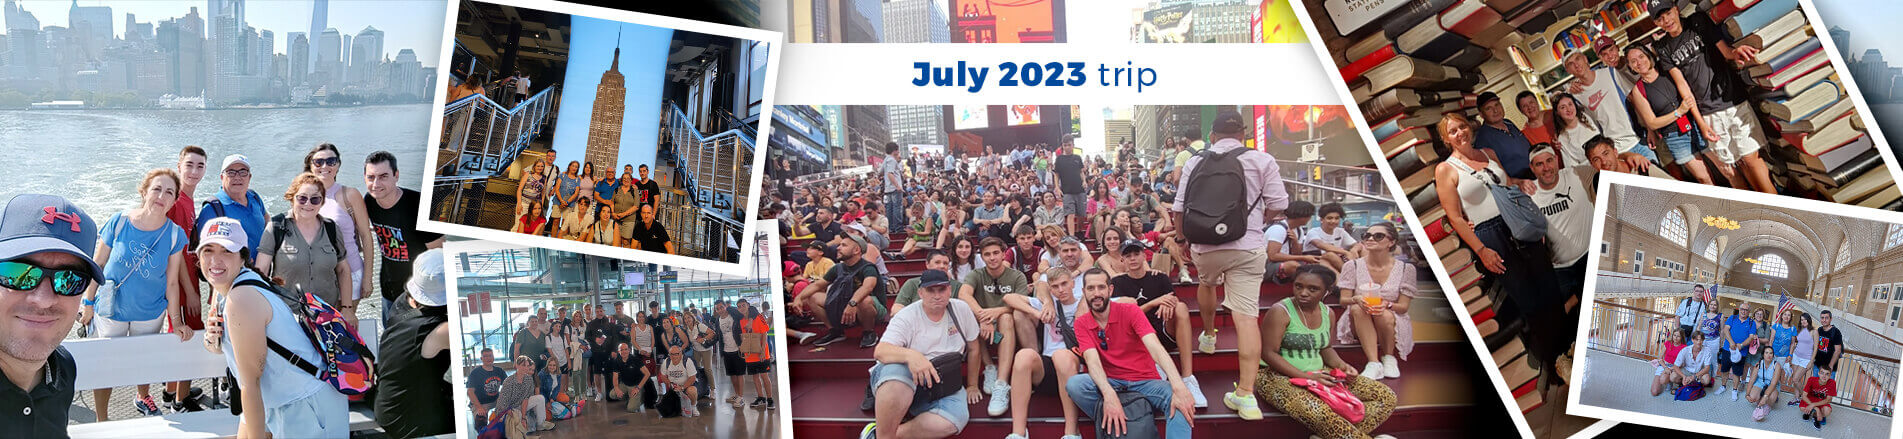 Trip to New York in July 2023 with Flight, Hotel & Guide